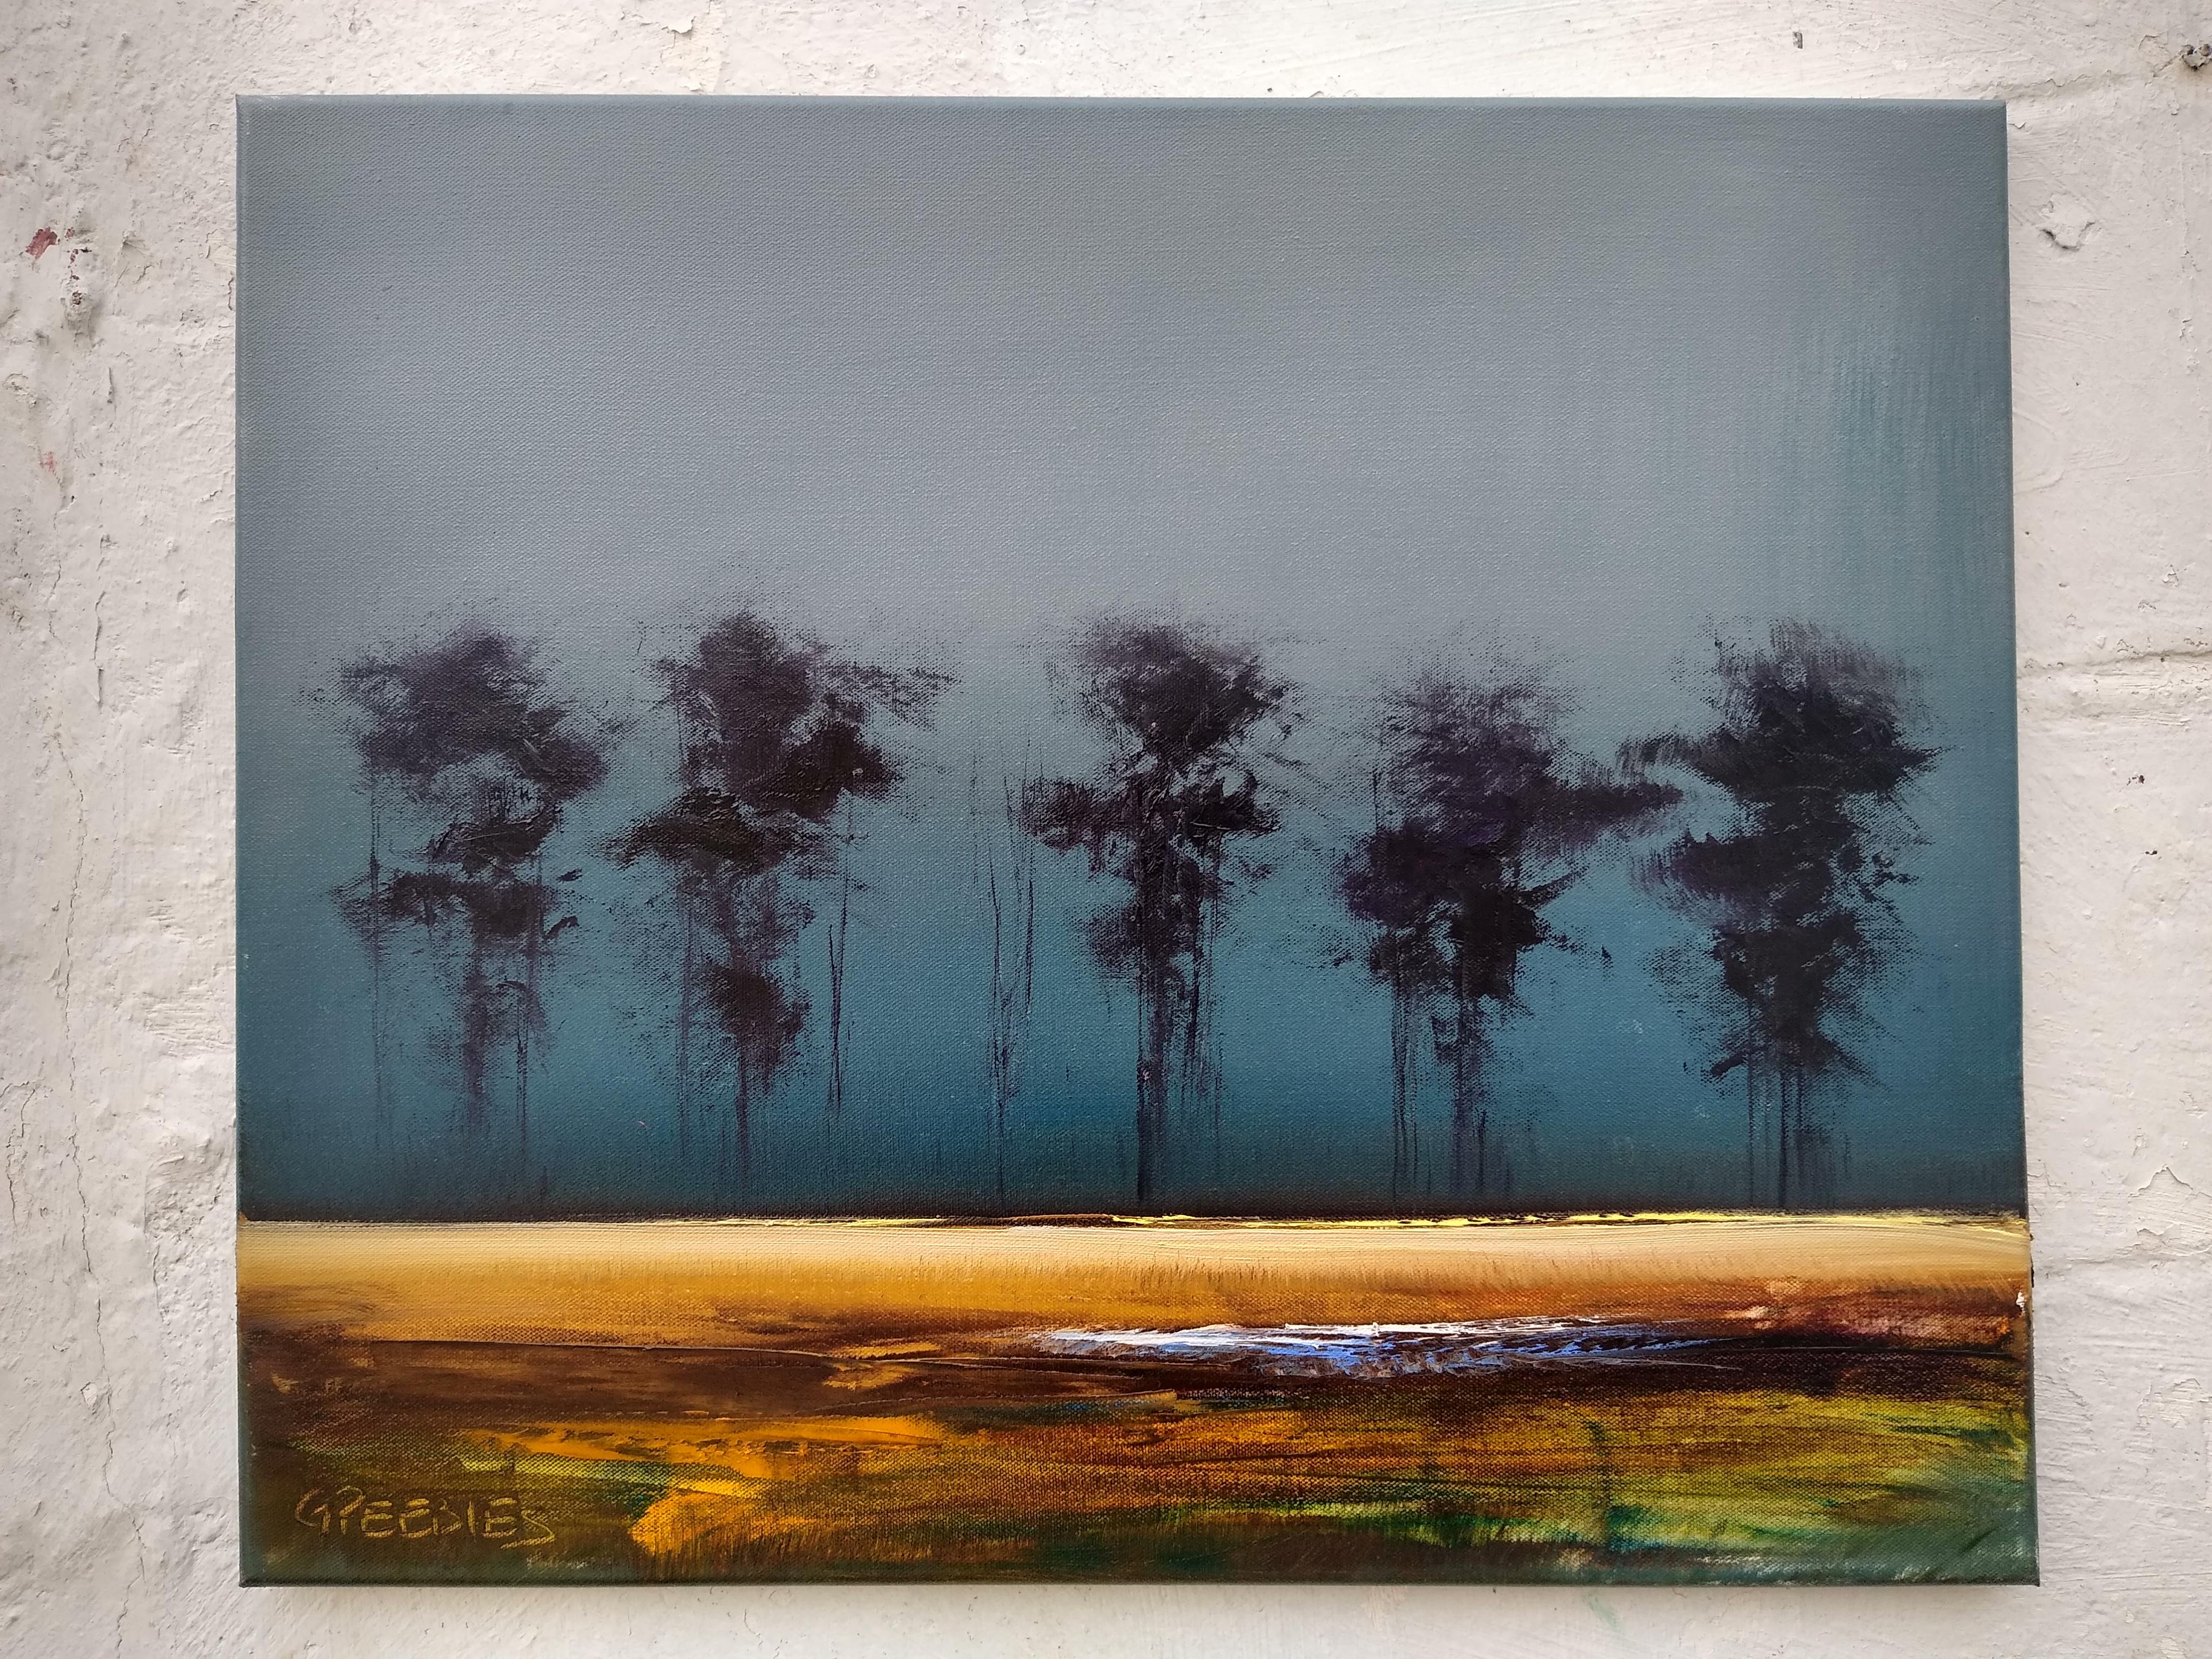 <p>Artist Comments<br>Artist George Peebles offers an evening landscape with tall willowy trees standing like shadows on the horizon. A dark image of the forest is starkly juxtaposed with a vibrant field in the foreground. George is known for his